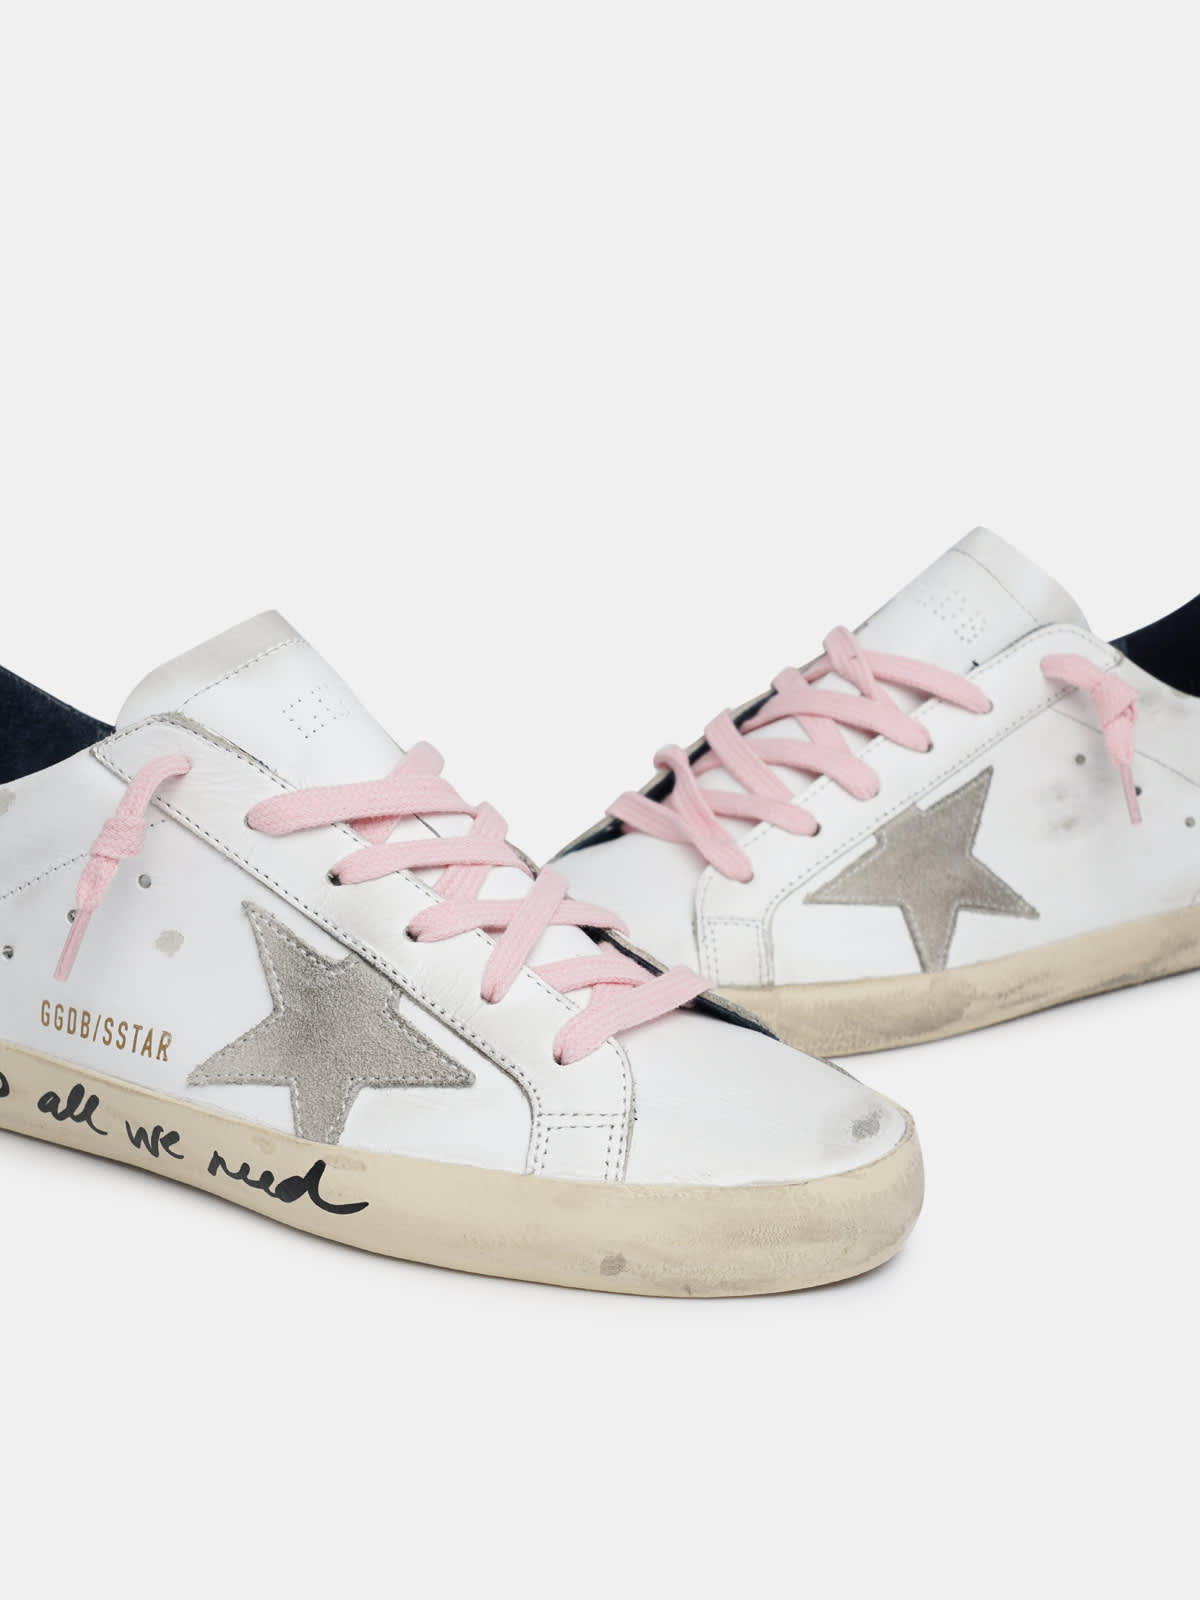 Super-Star sneakers with handwritten Love is all we need lettering